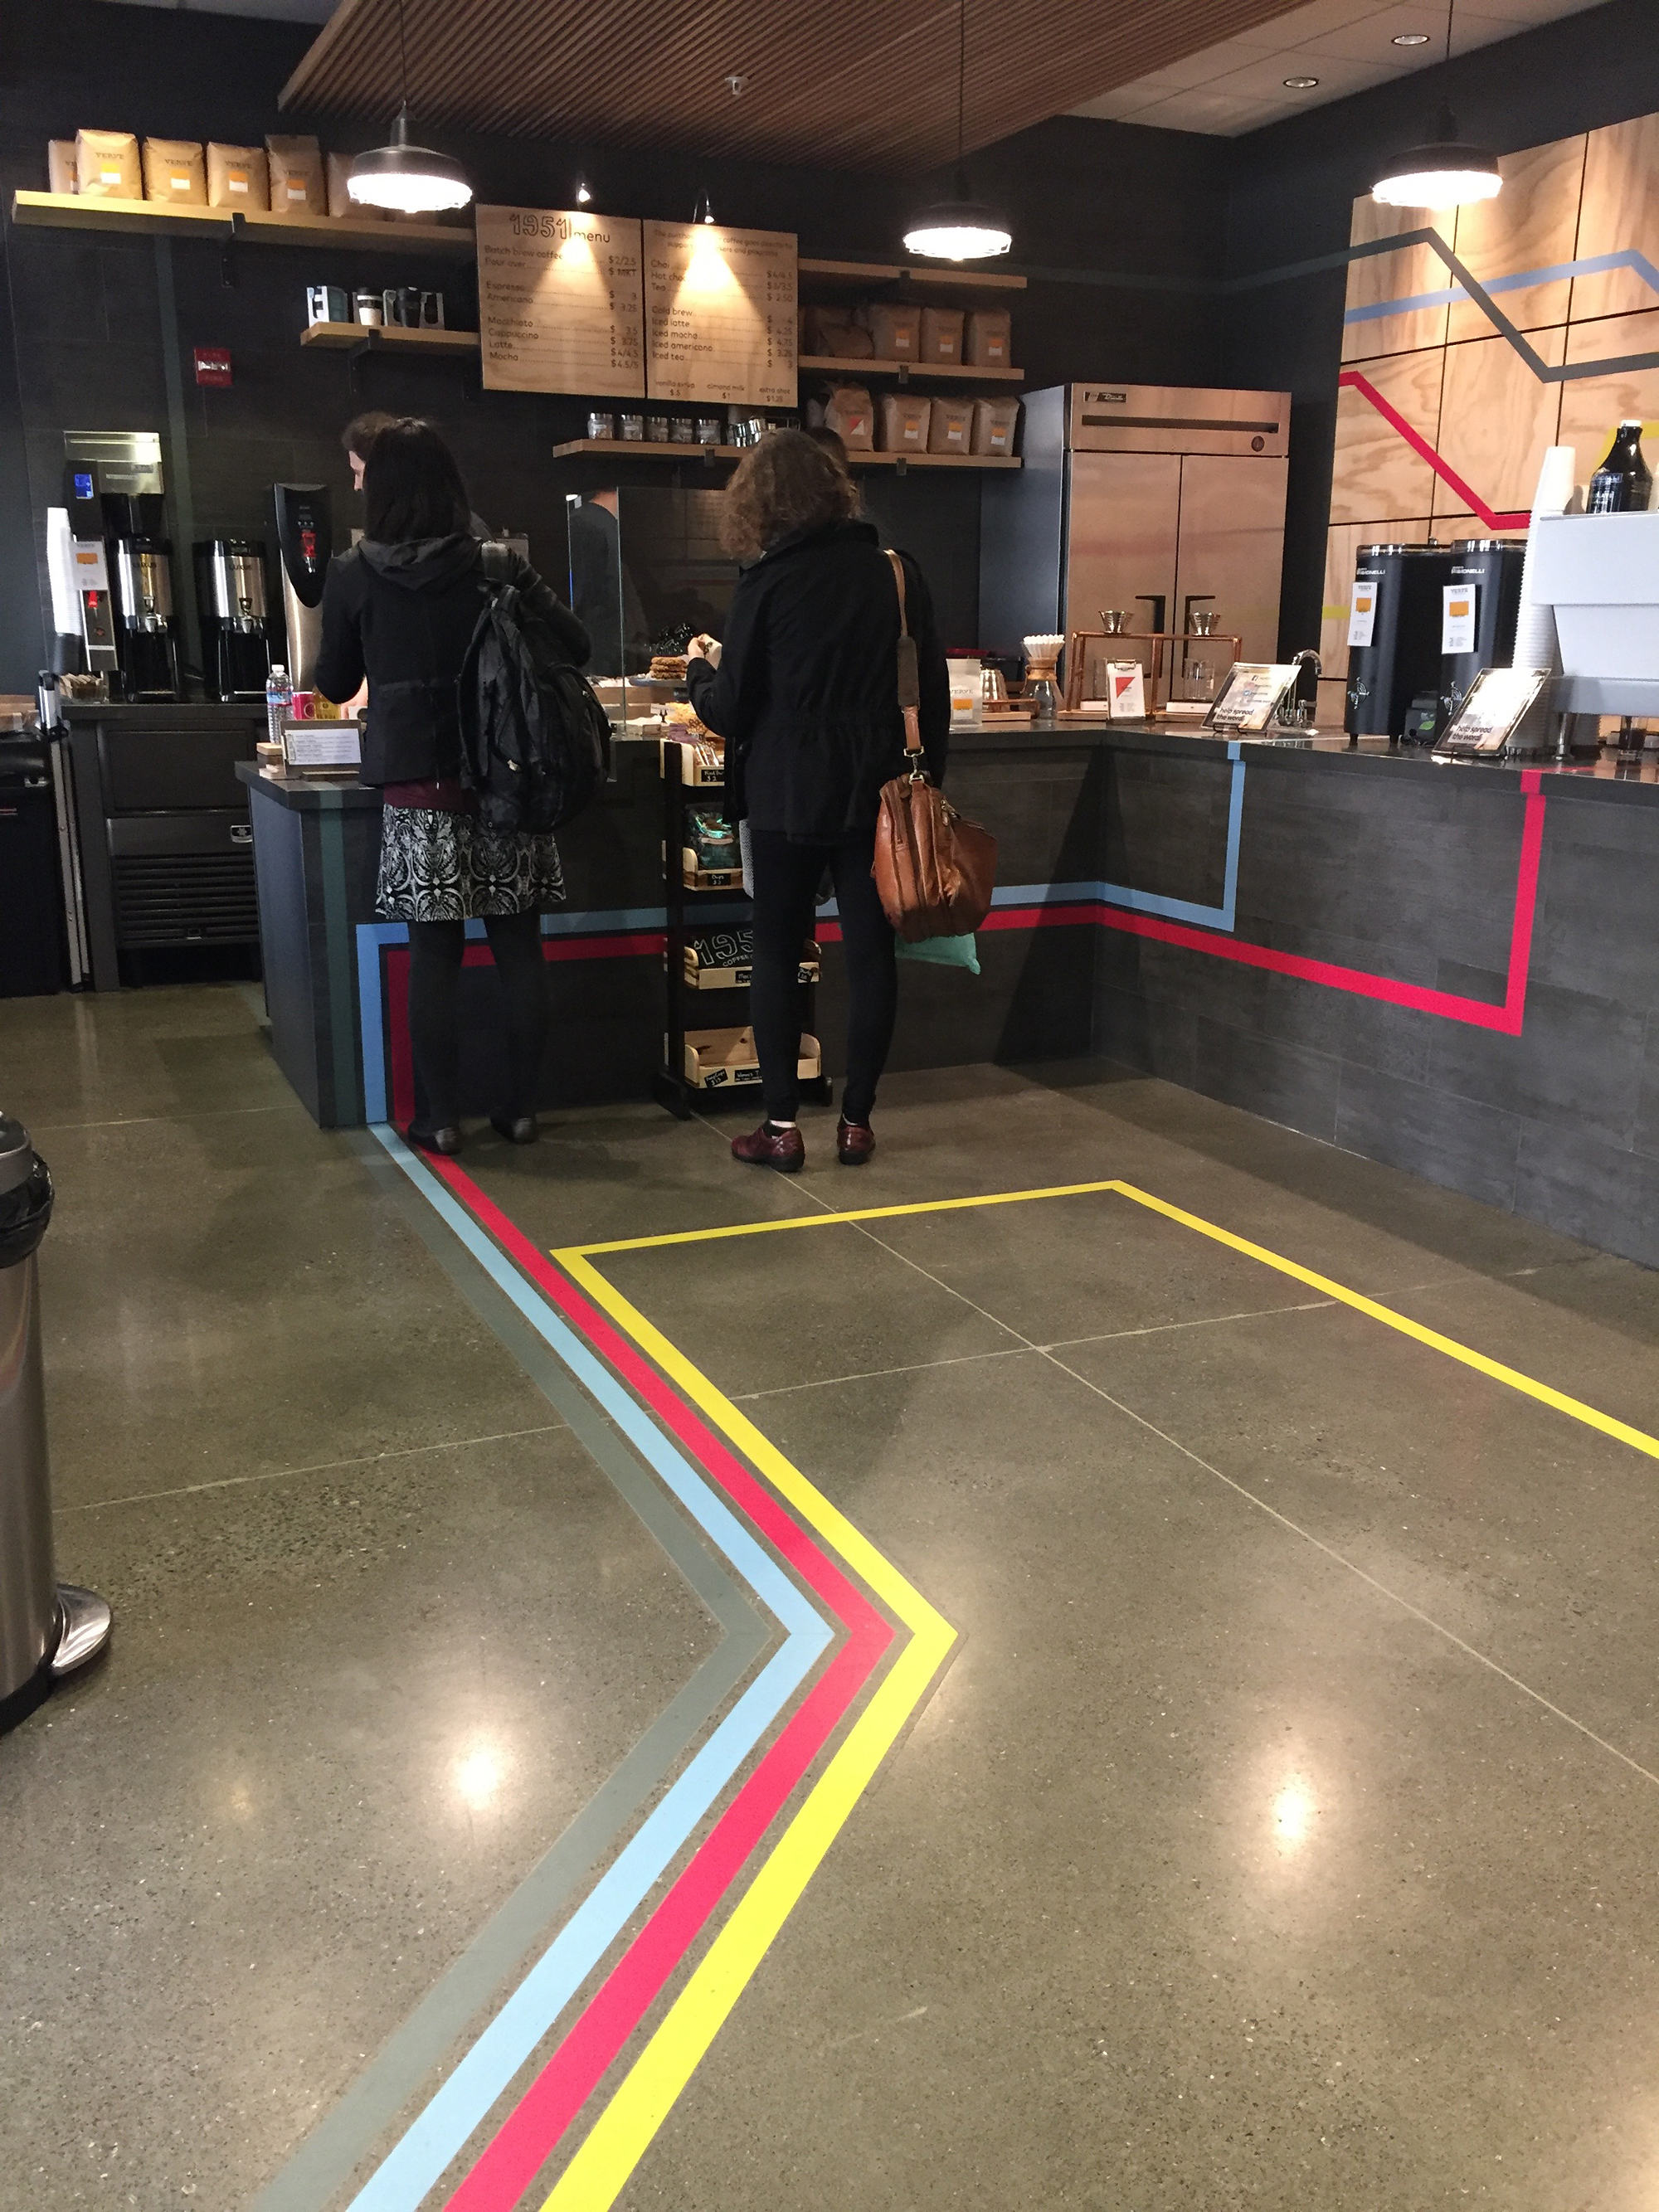 The colorful stripes on the cafe's floor suggest the long journey to resettlement.